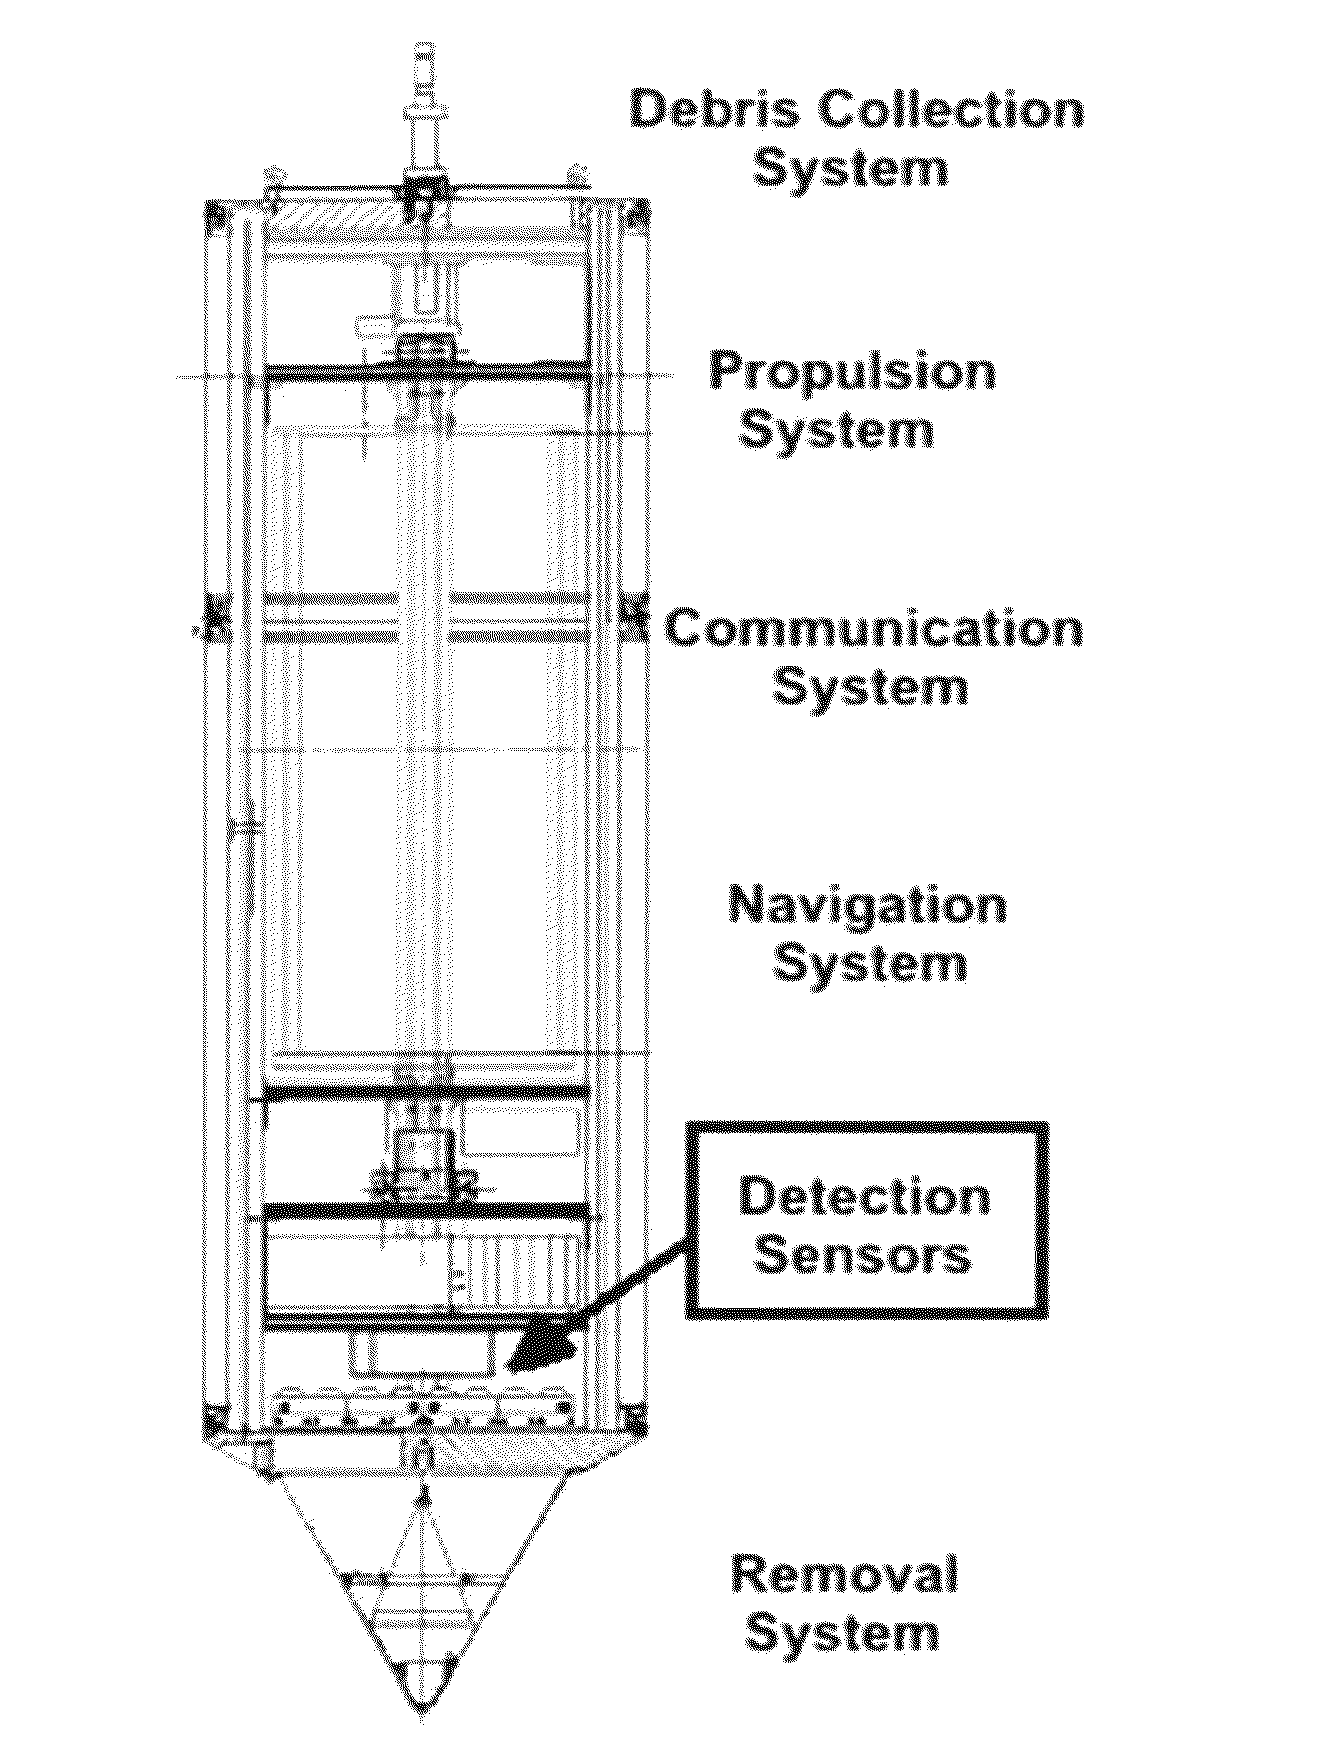 System for blood vessels cleaning, such as for a coronary artery, peripheral artery or any other body vessel, based on mobile agent